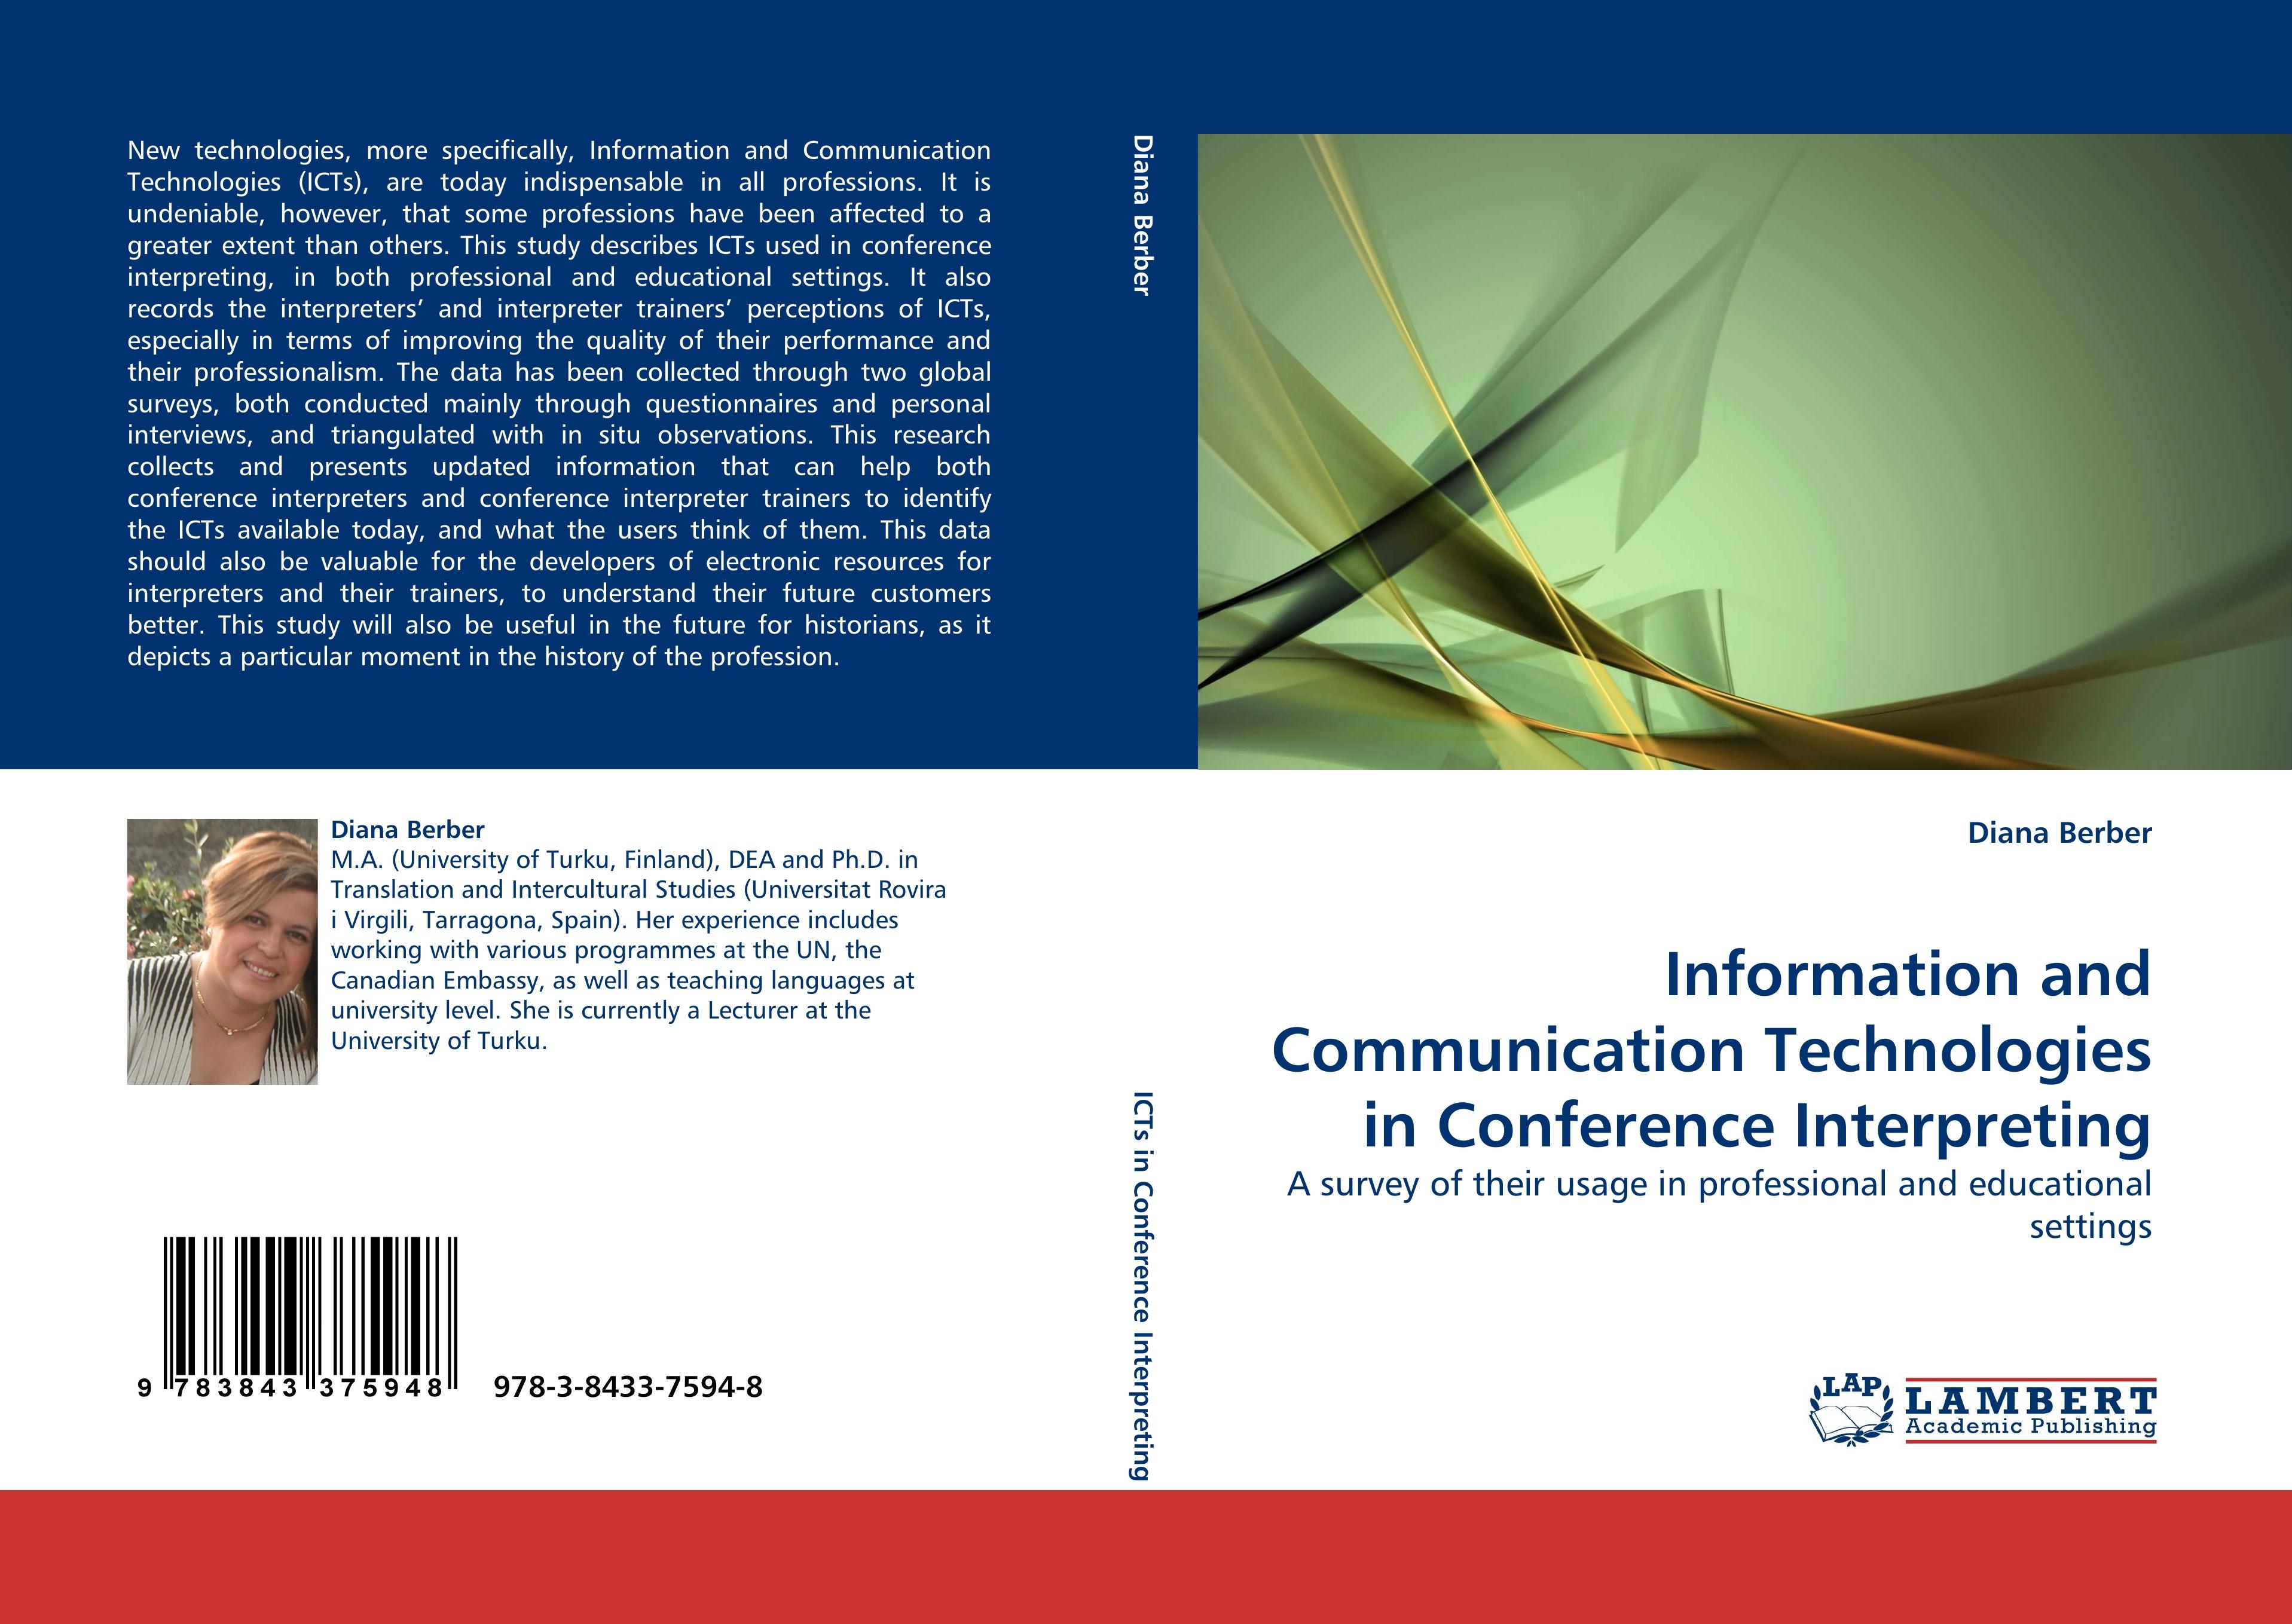 Information and Communication Technologies in Conference Interpreting - Diana Berber